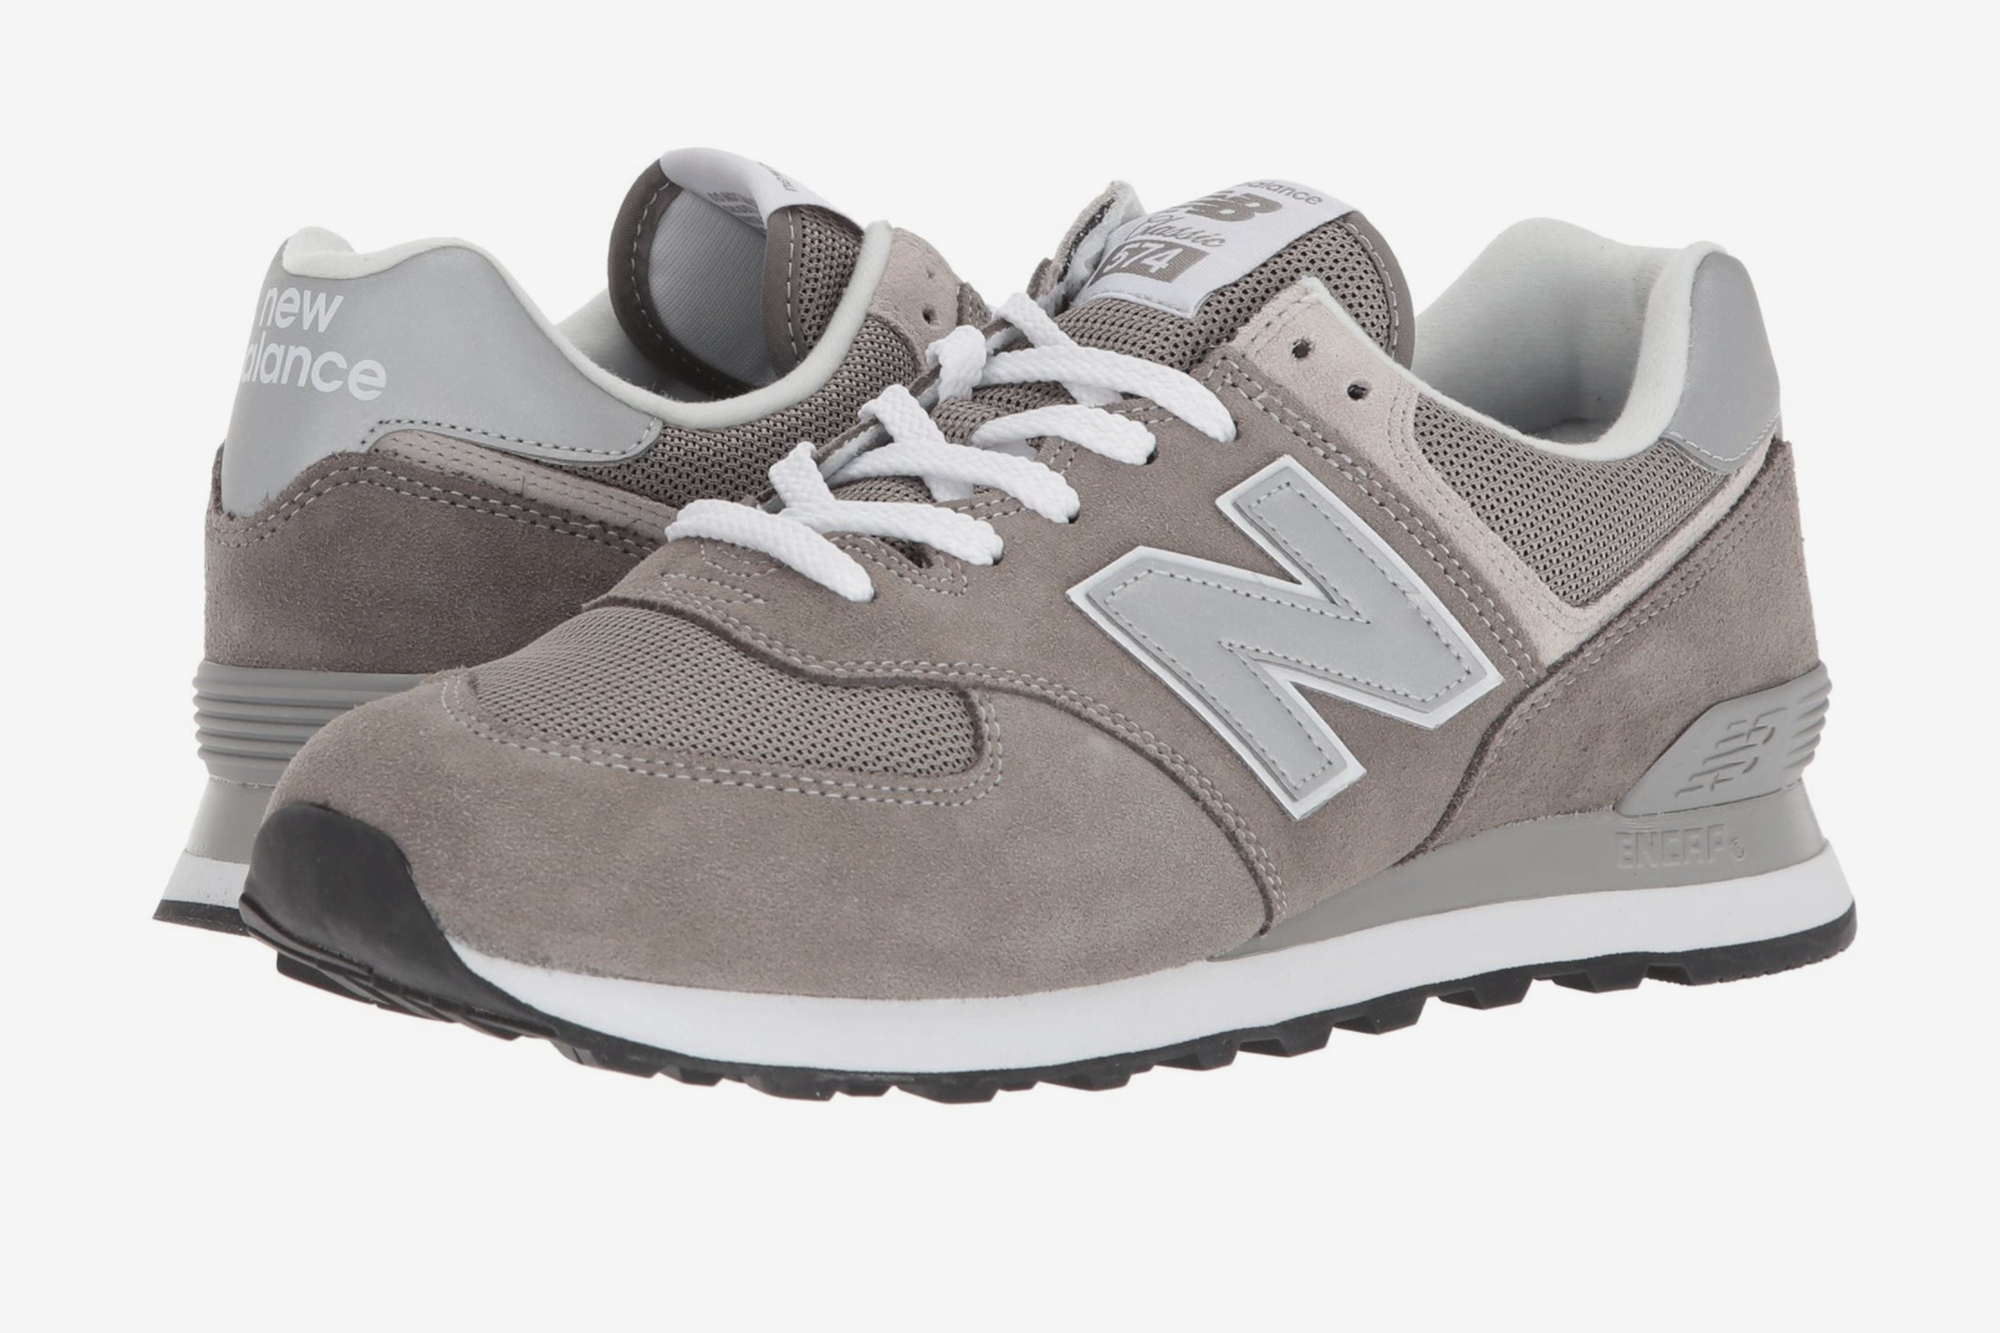 Franje Bijdragen Augment These Neutral New Balance Sneakers Are Your New Go-To Shoes!